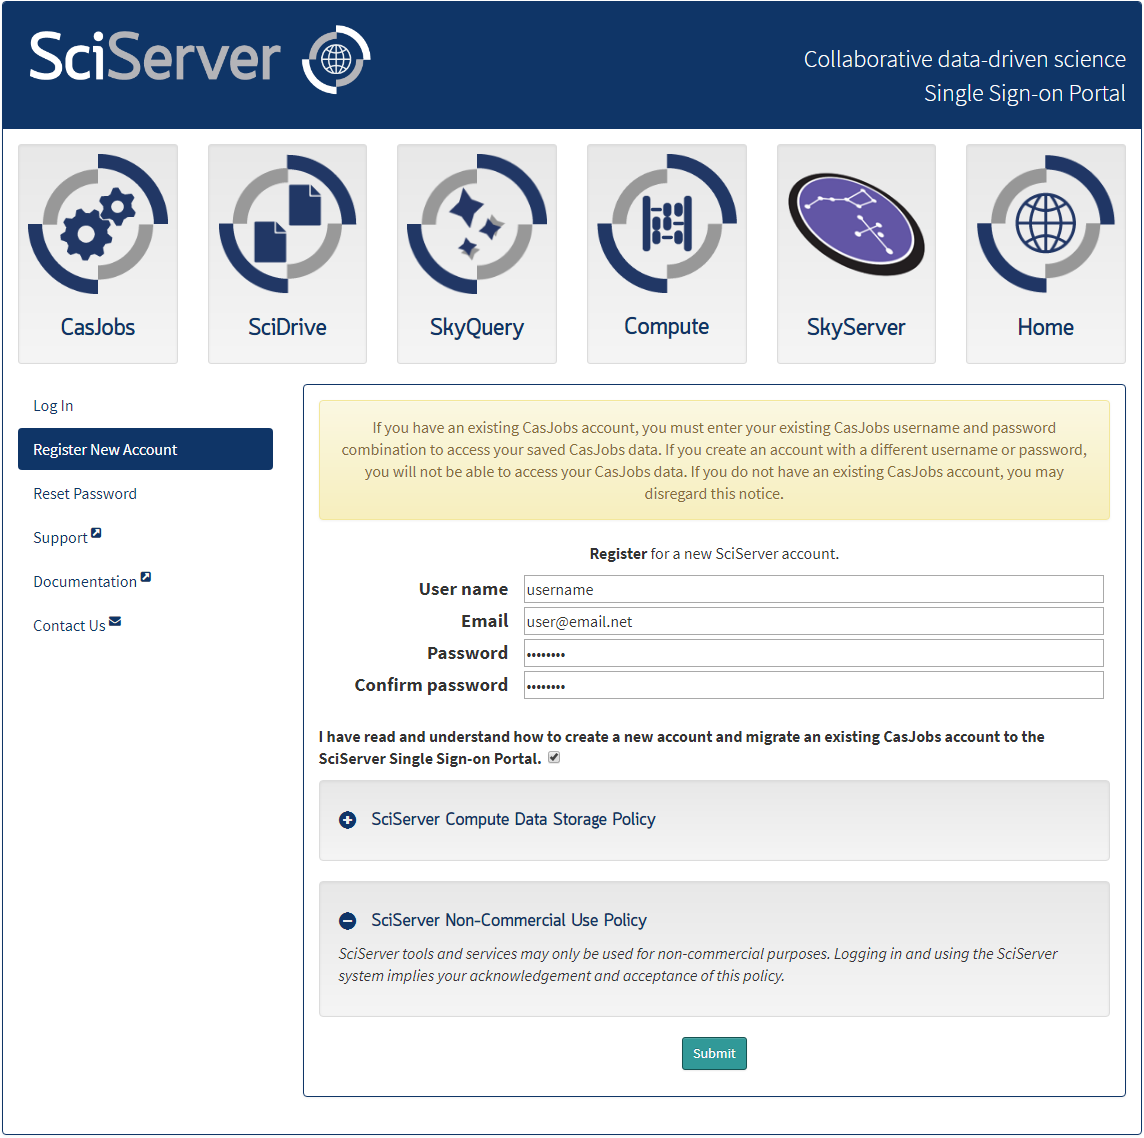 SciServer CasJobs and new user registration form asking for username, email, and password